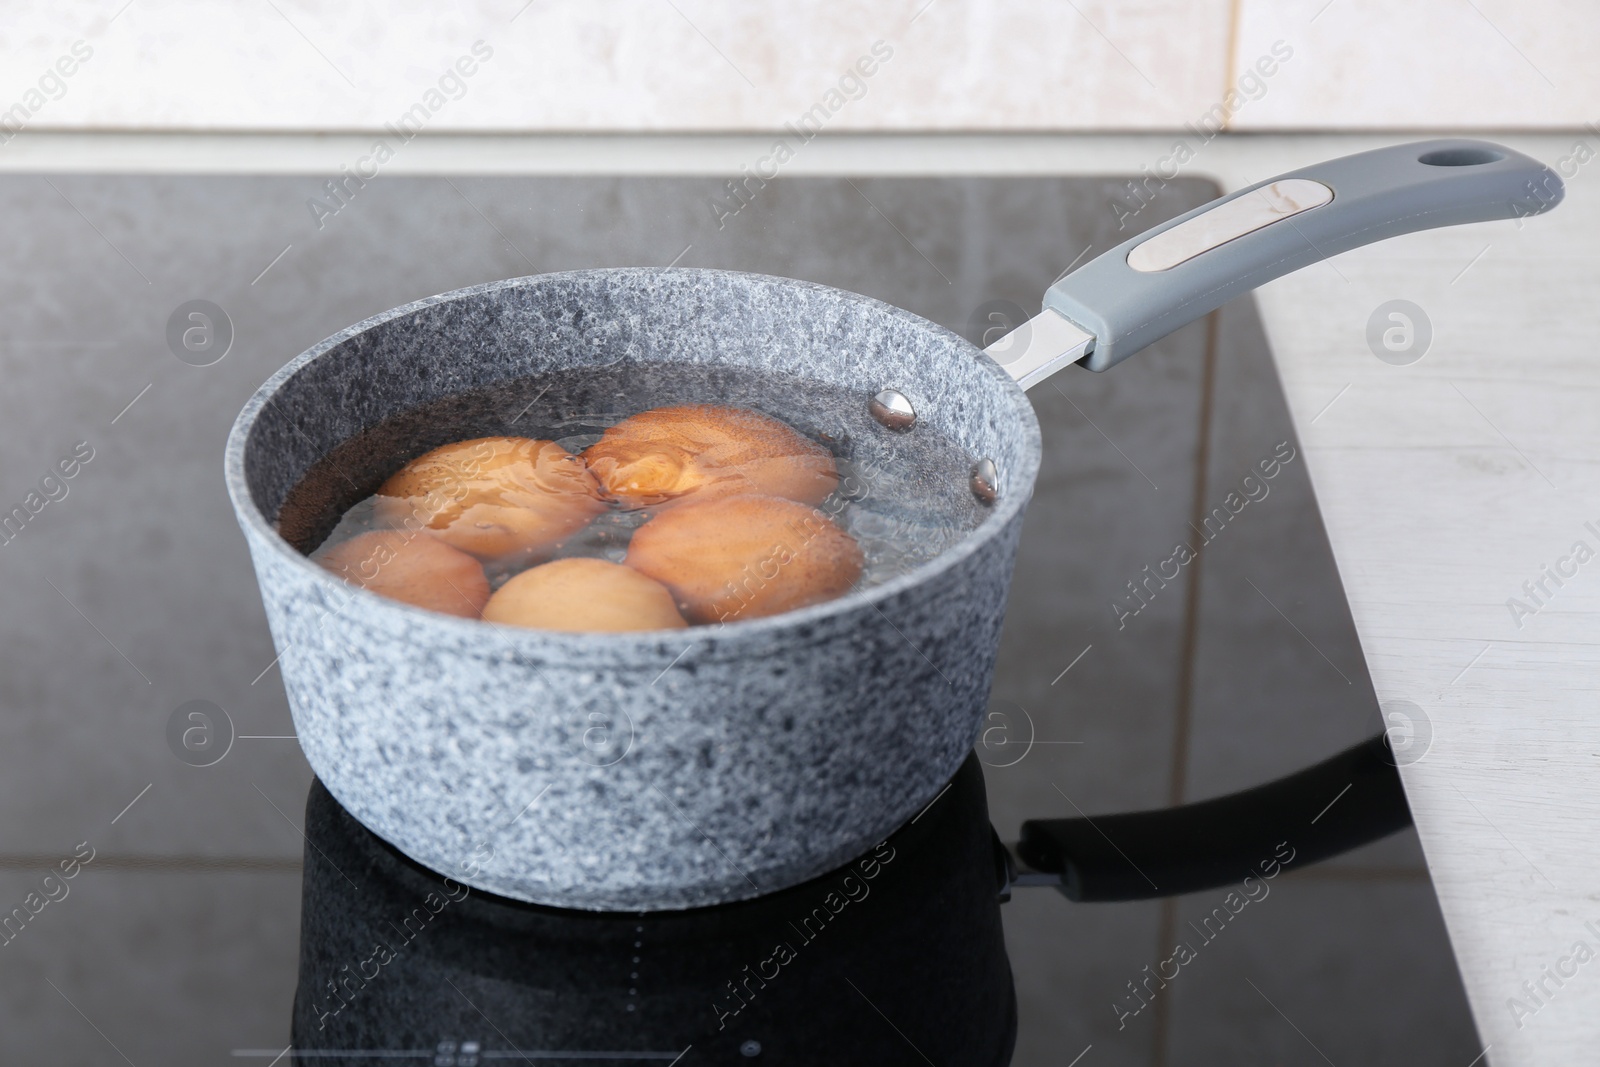 Photo of Chicken eggs boiling in saucepan on electric stove